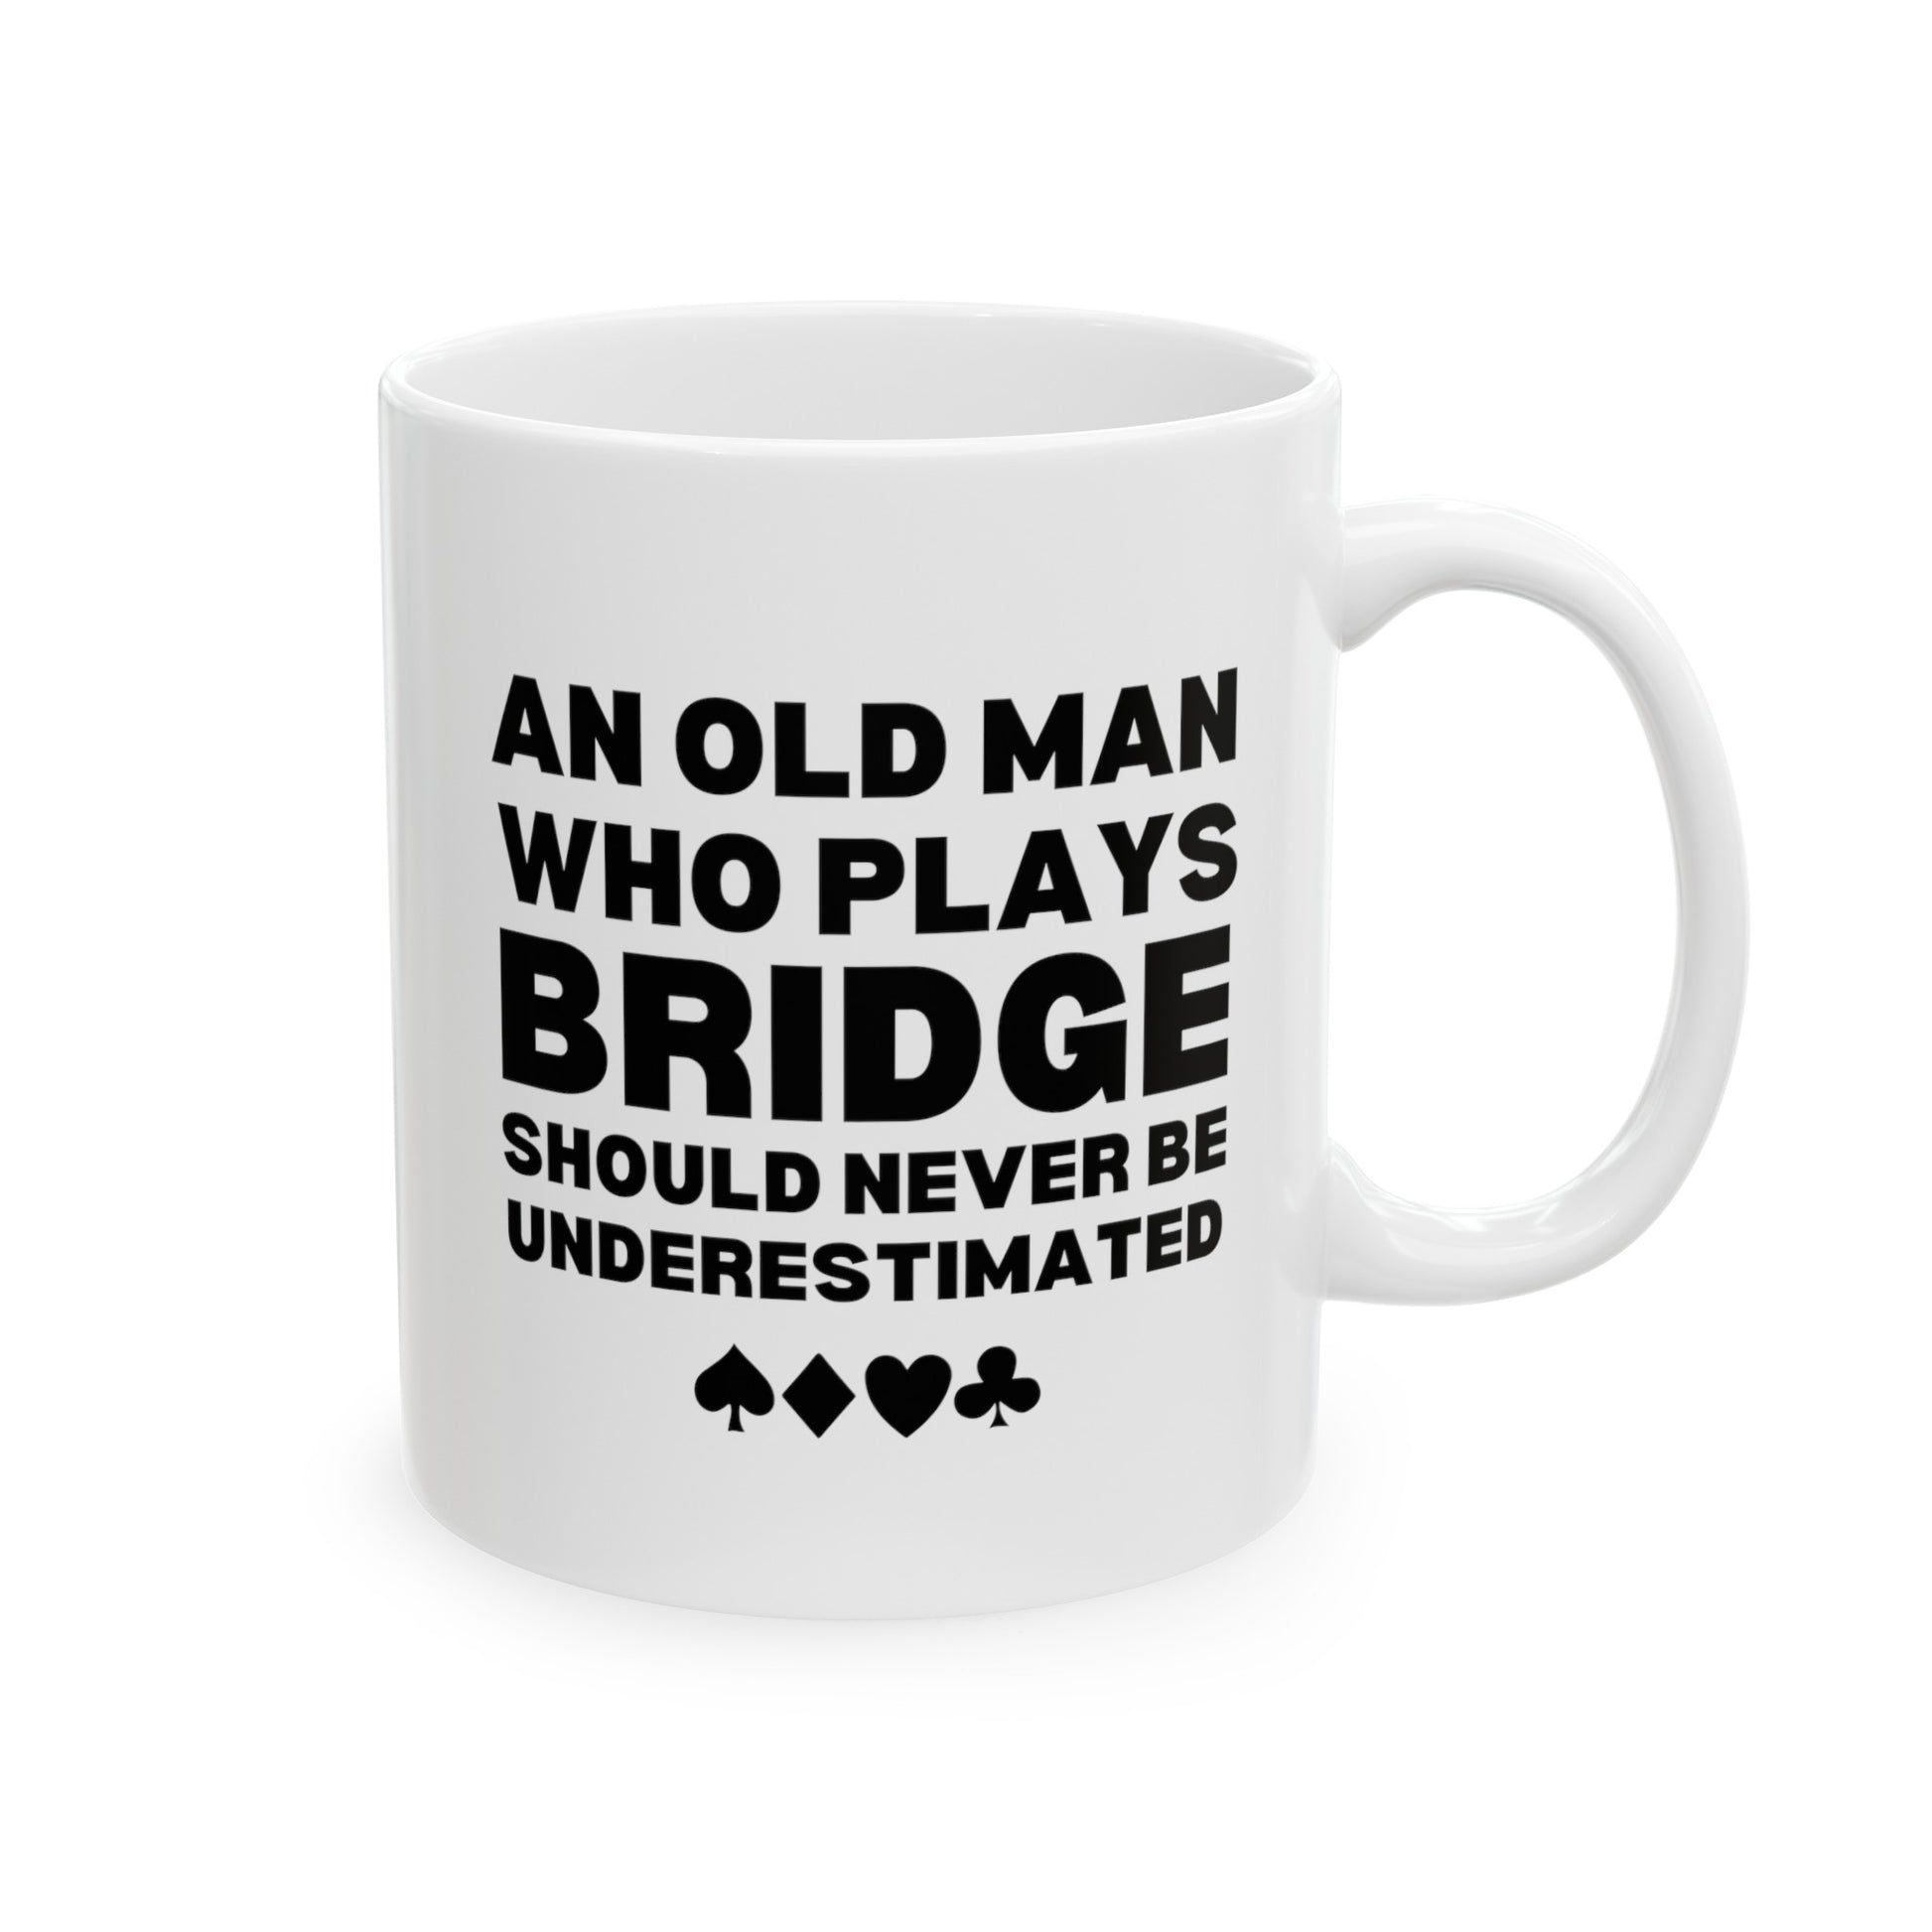 An Old Man Who Plays Bridge Should Never Be Underestimated 11oz white funny large coffee mug gift for player card game waveywares wavey wares wavywares wavy wares